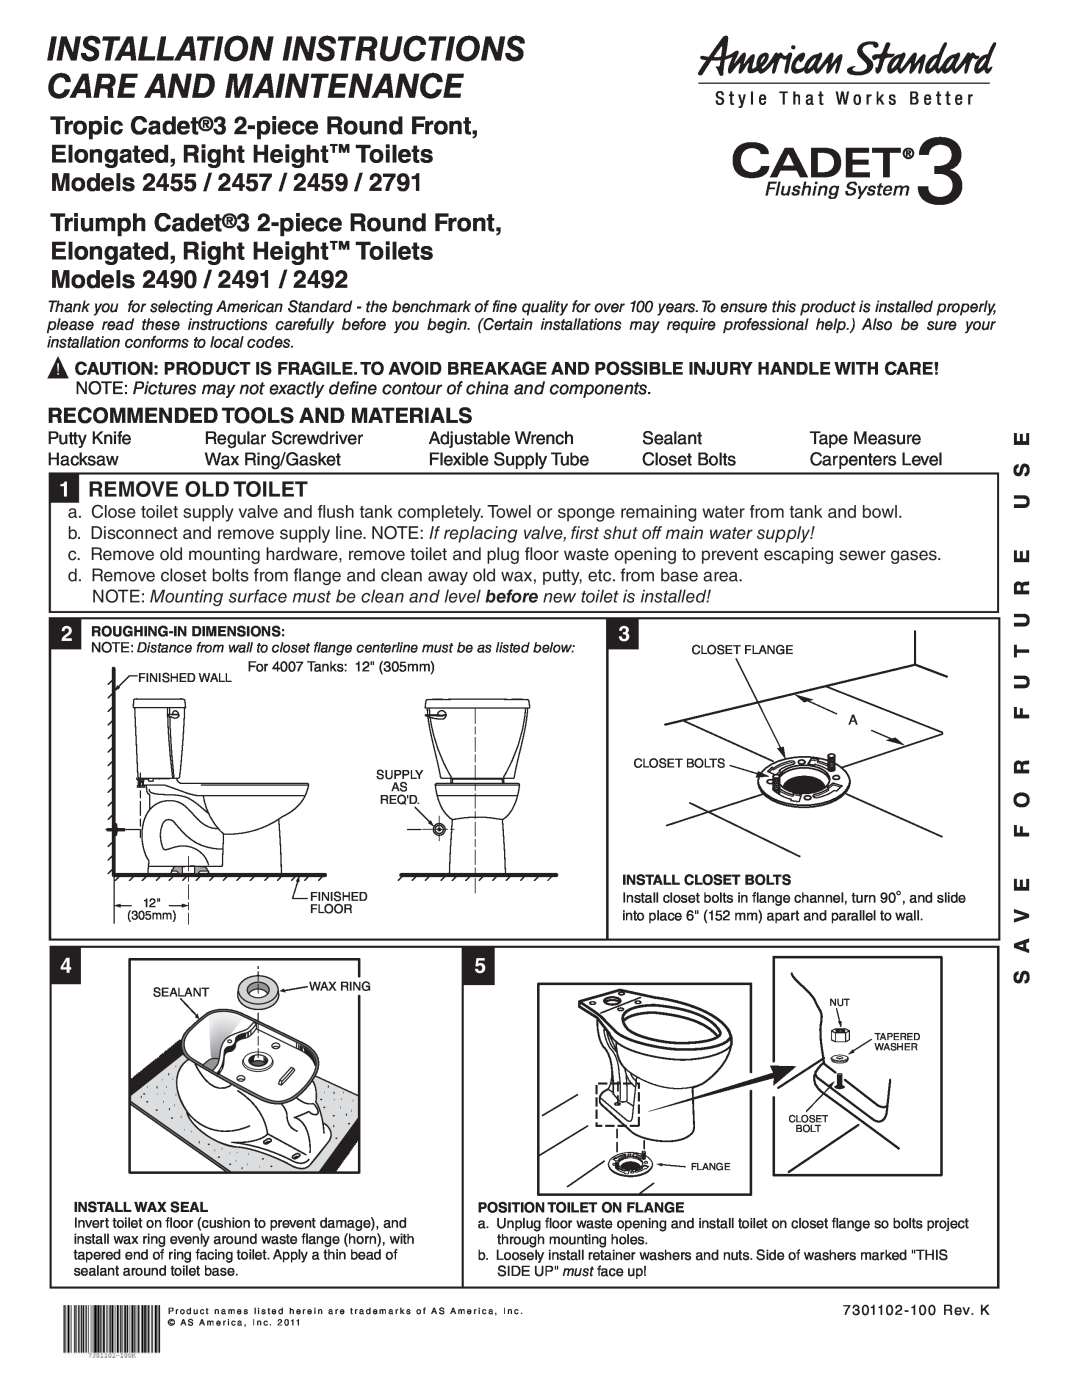 American Standard 2459 installation instructions Recommended Tools And Materials, 1REMOVE OLD TOILET, U R E U S E, Models 